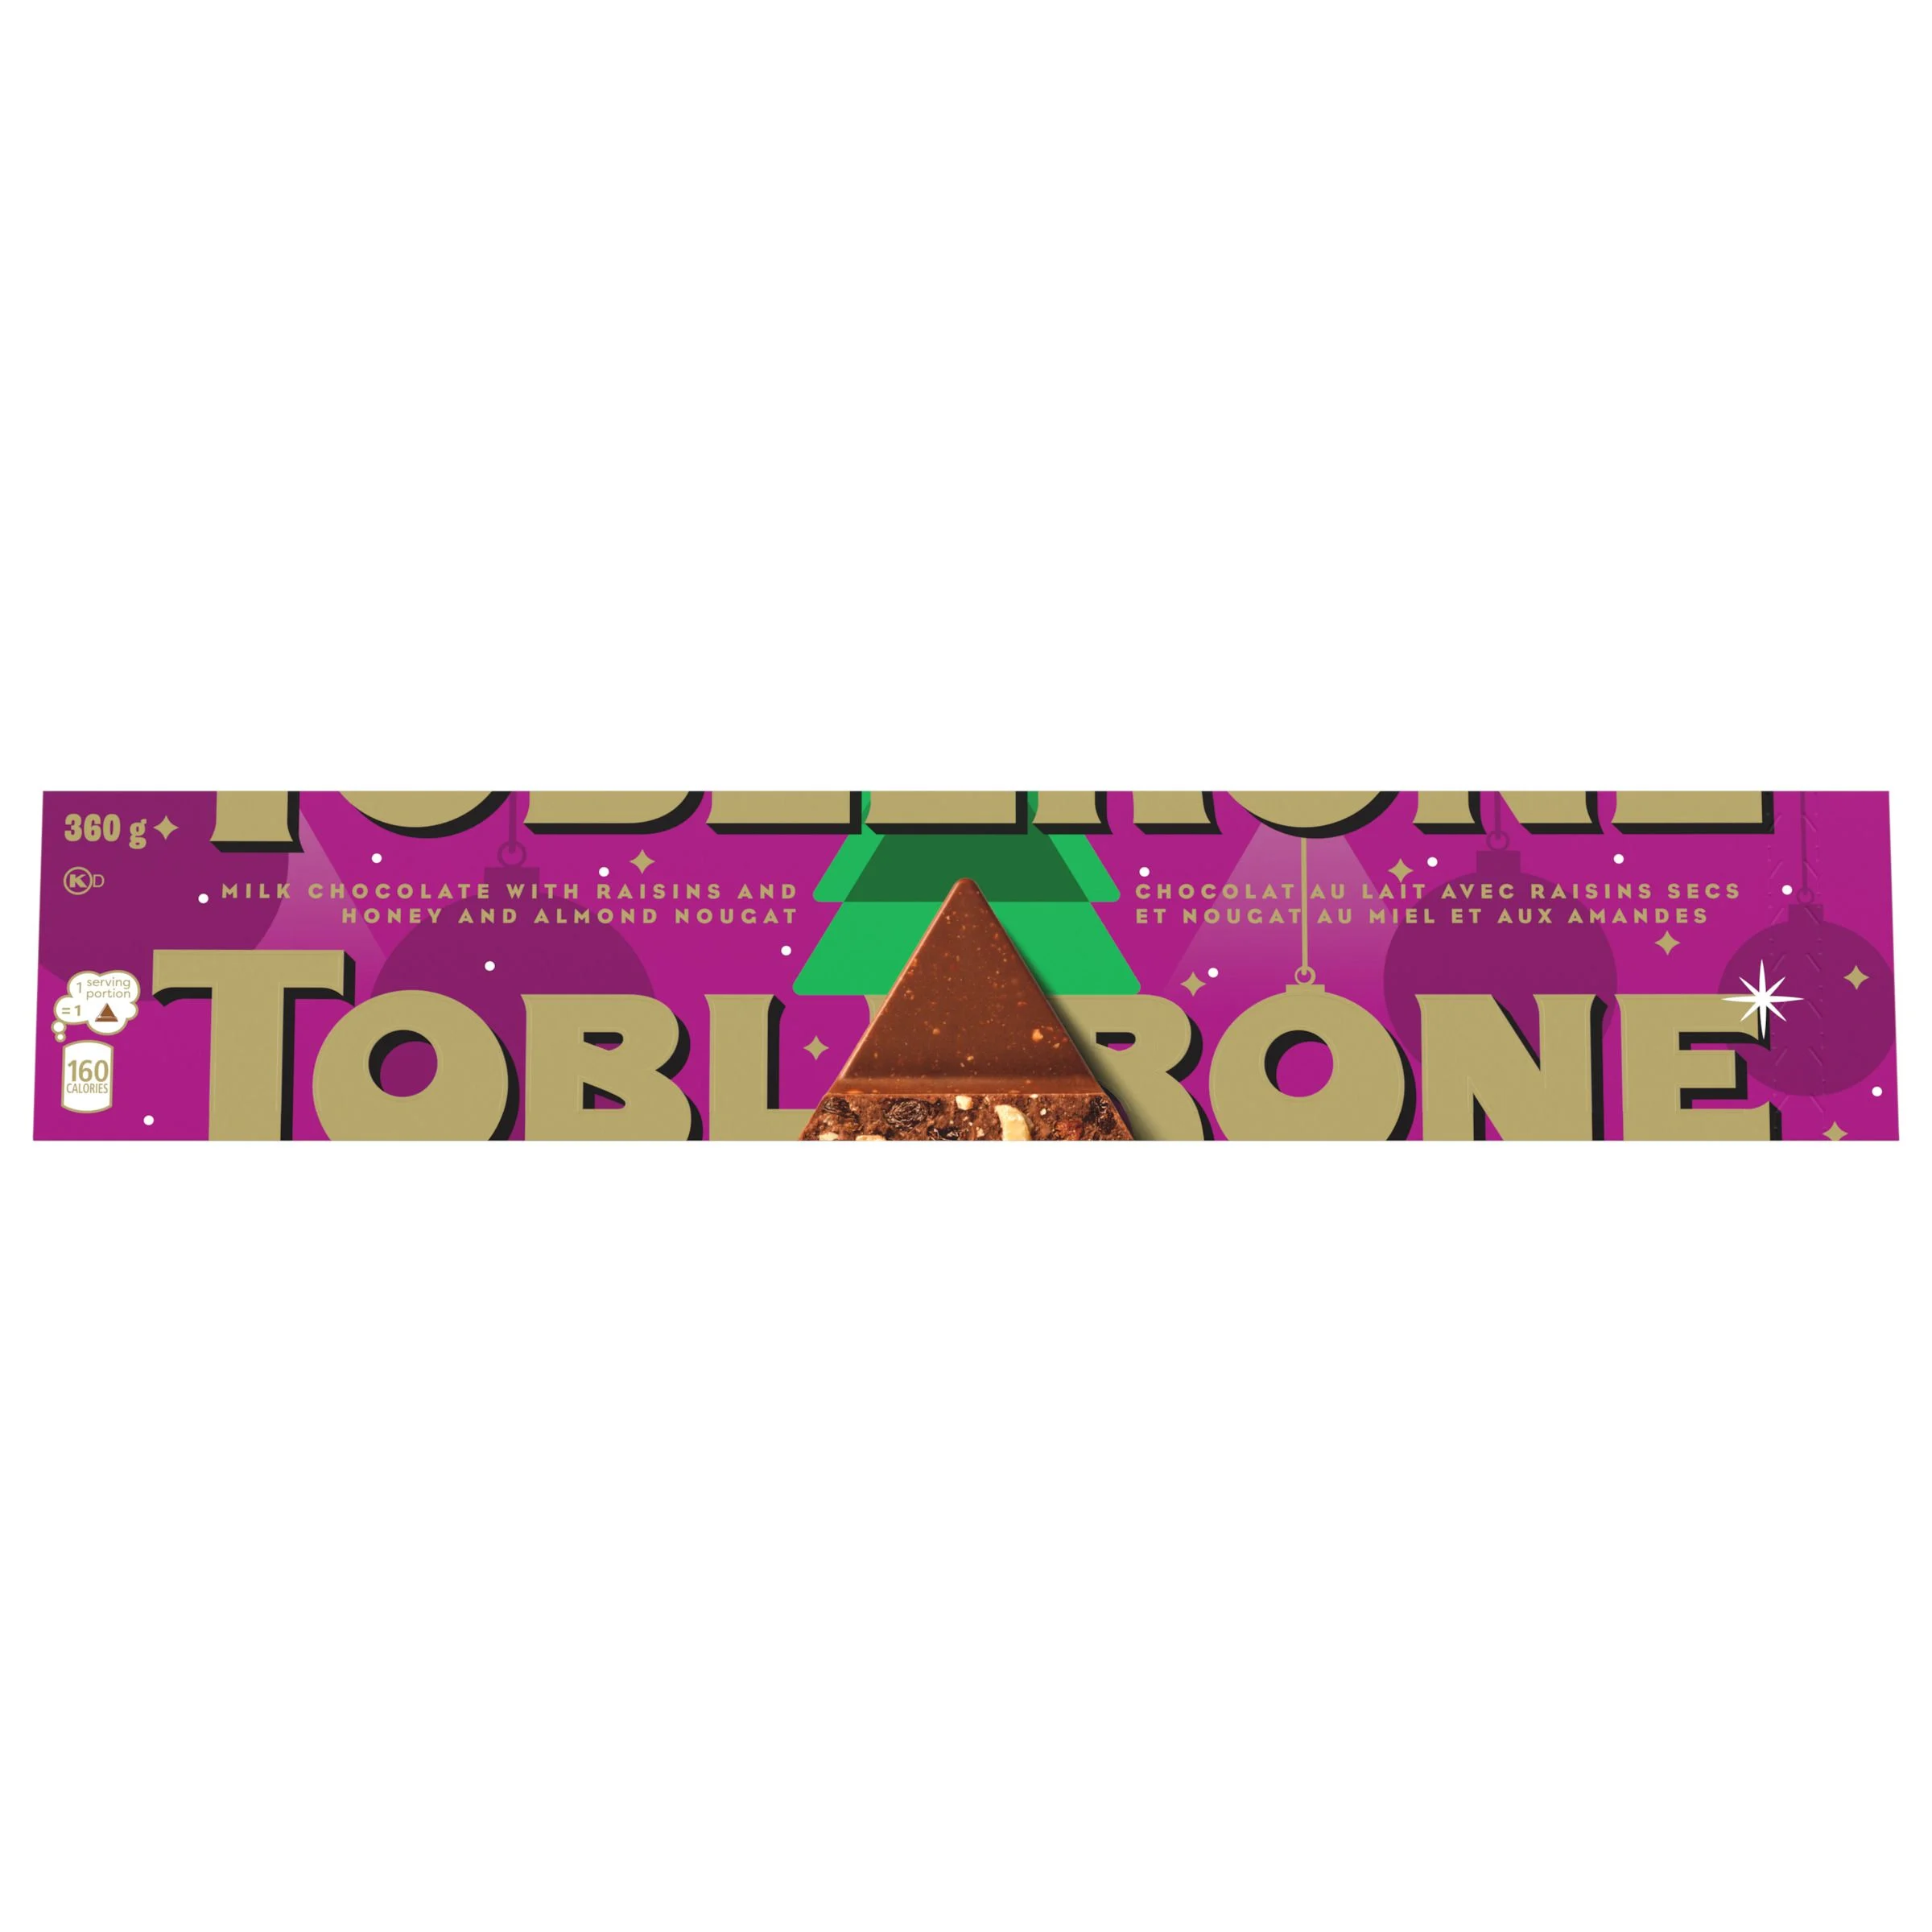 TOBLERONE FRUIT AND NUT MILK CHOCOLATE WITH HONEY AND ALMOND NOUGAT BAR (360 G)